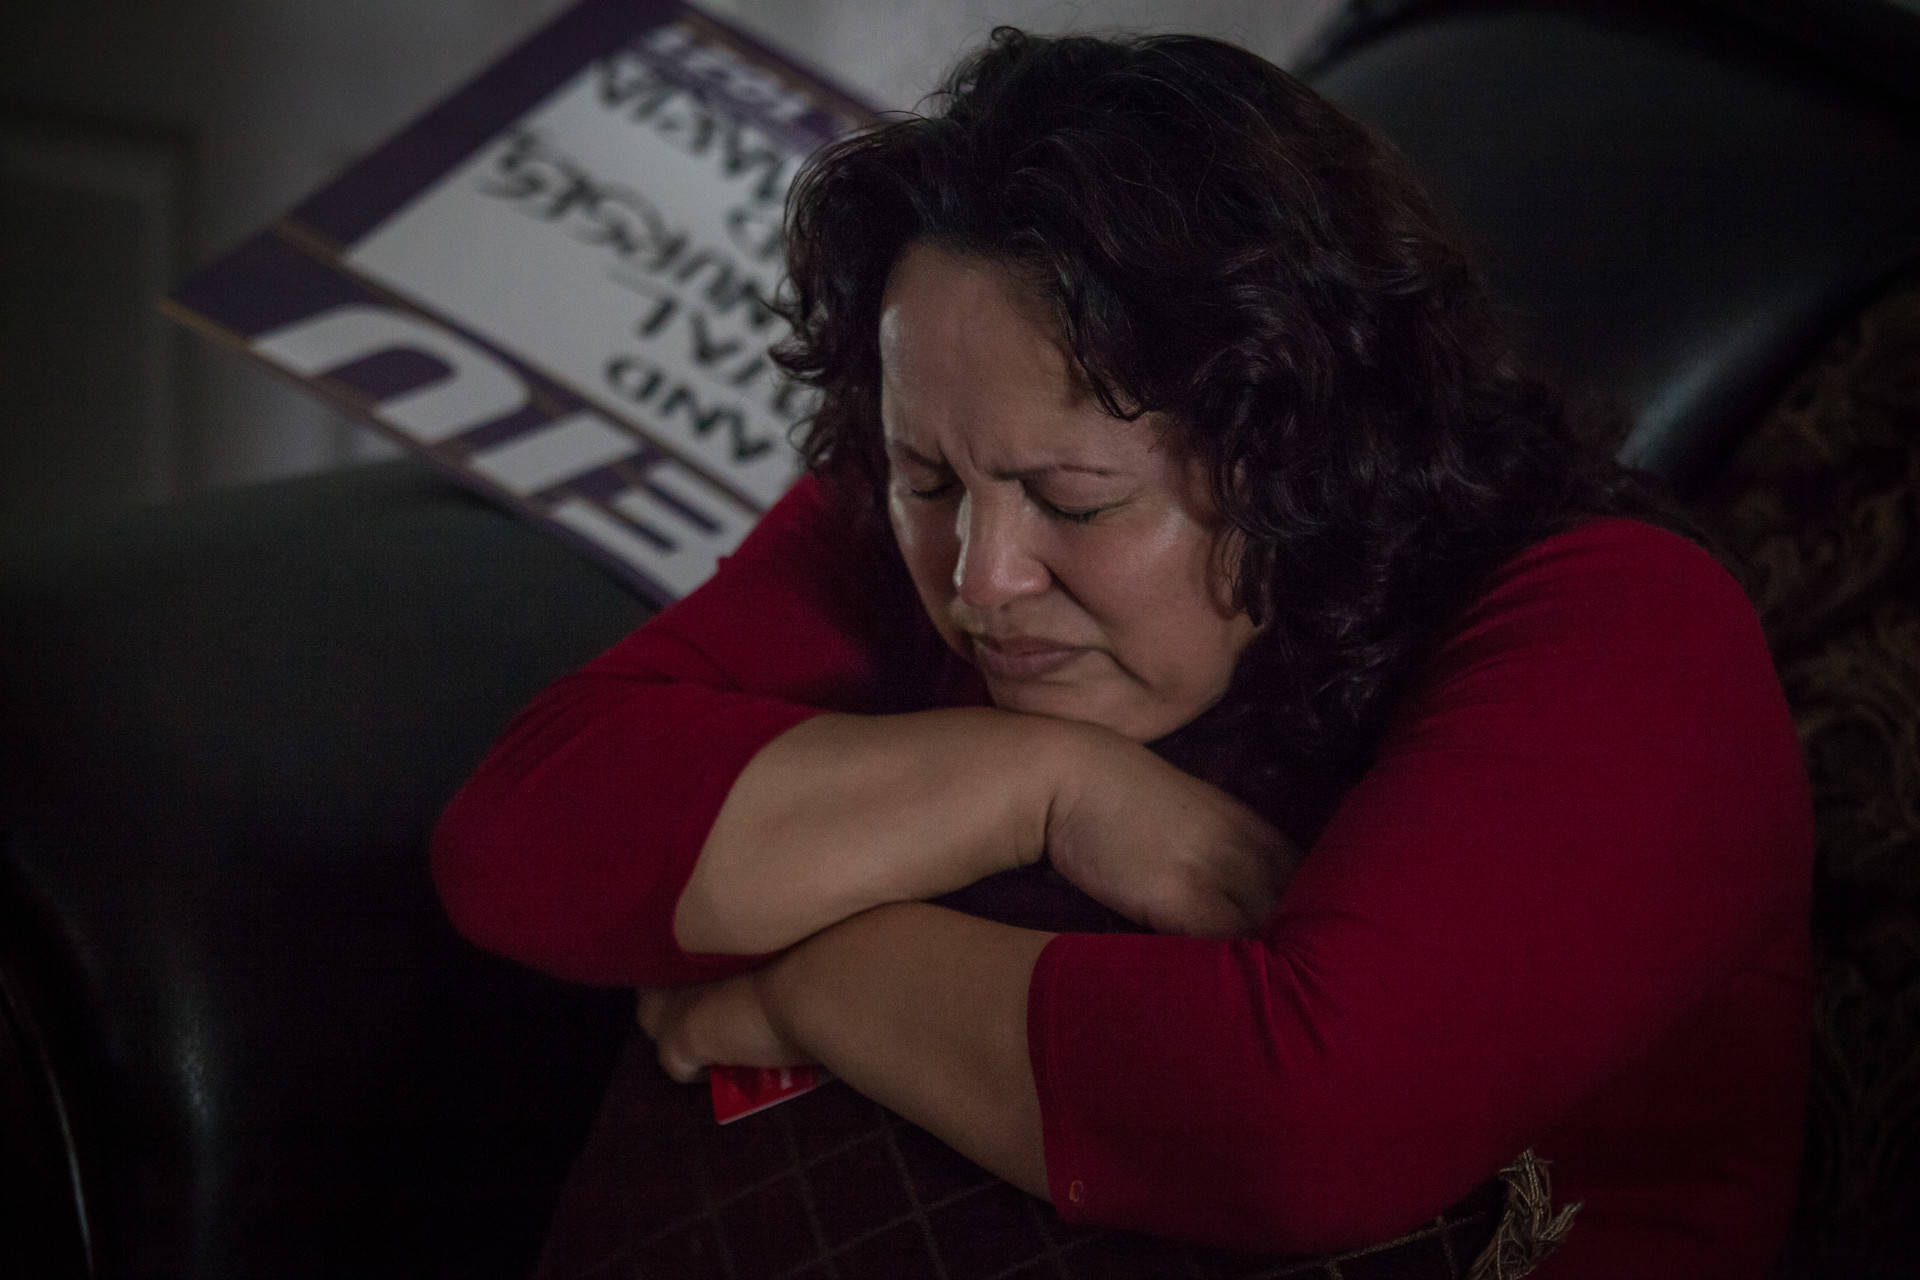 Maria Mendoza-Sanchez clutches a pillow in her Oakland home on Wednesday, Aug. 16, 2017, hours before she, her husband and their son left the U.S. for Mexico after federal immigration authorities denied their request for a reprieve.  Deborah Svoboda/KQED